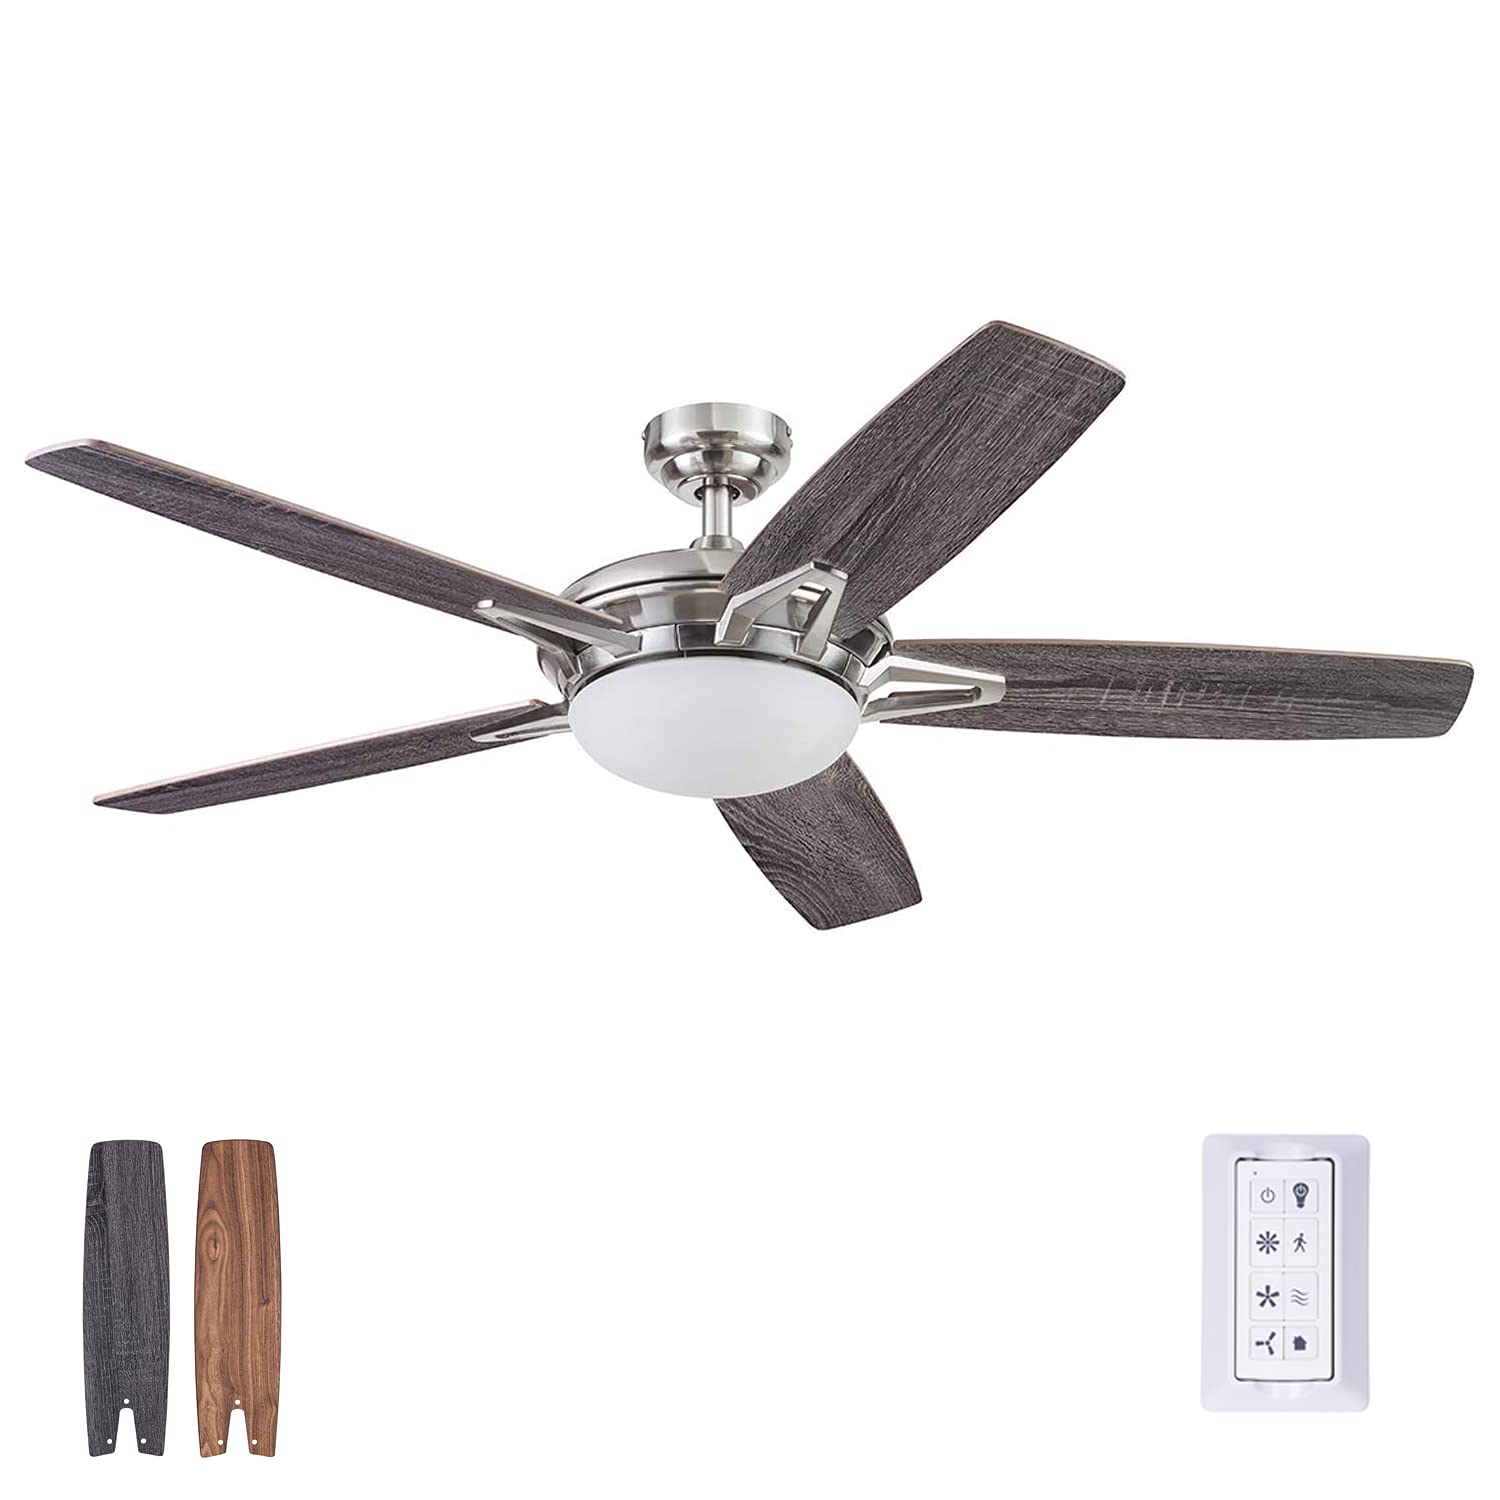 Prominence Home 51482-01 Clancy Ceiling Fan, 52, Brushed Nickel